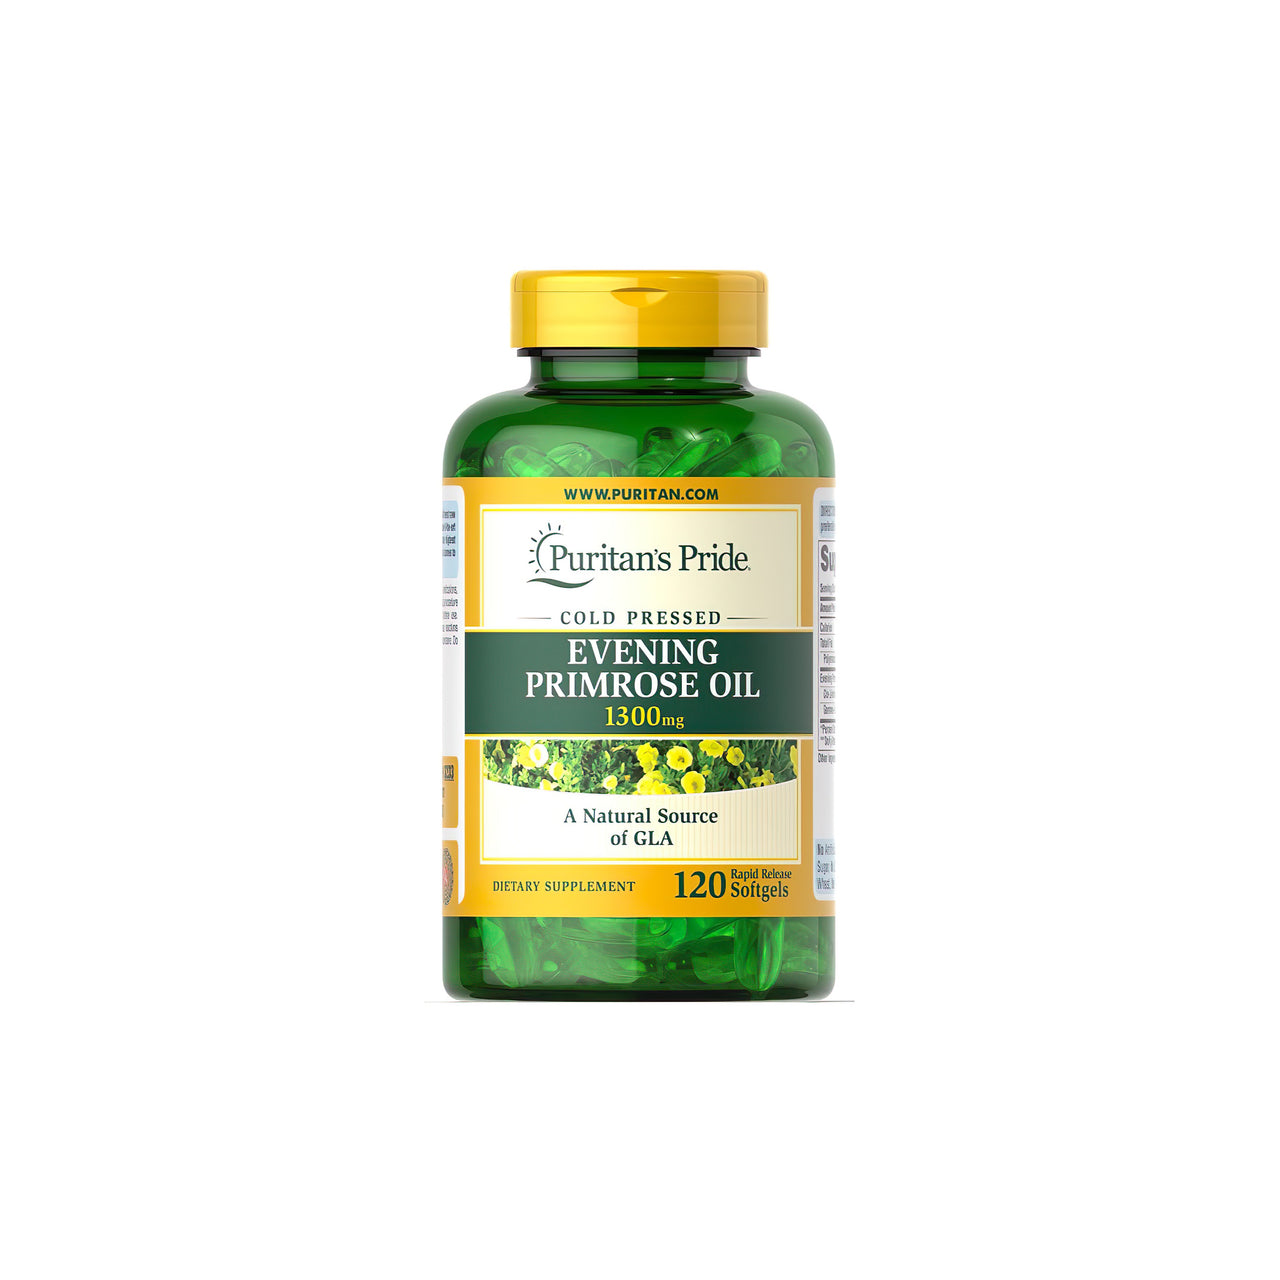 A bottle of Evening Primrose Oil 1300 mg with GLA 120 Rapid Release Softgels from Puritan's Pride.